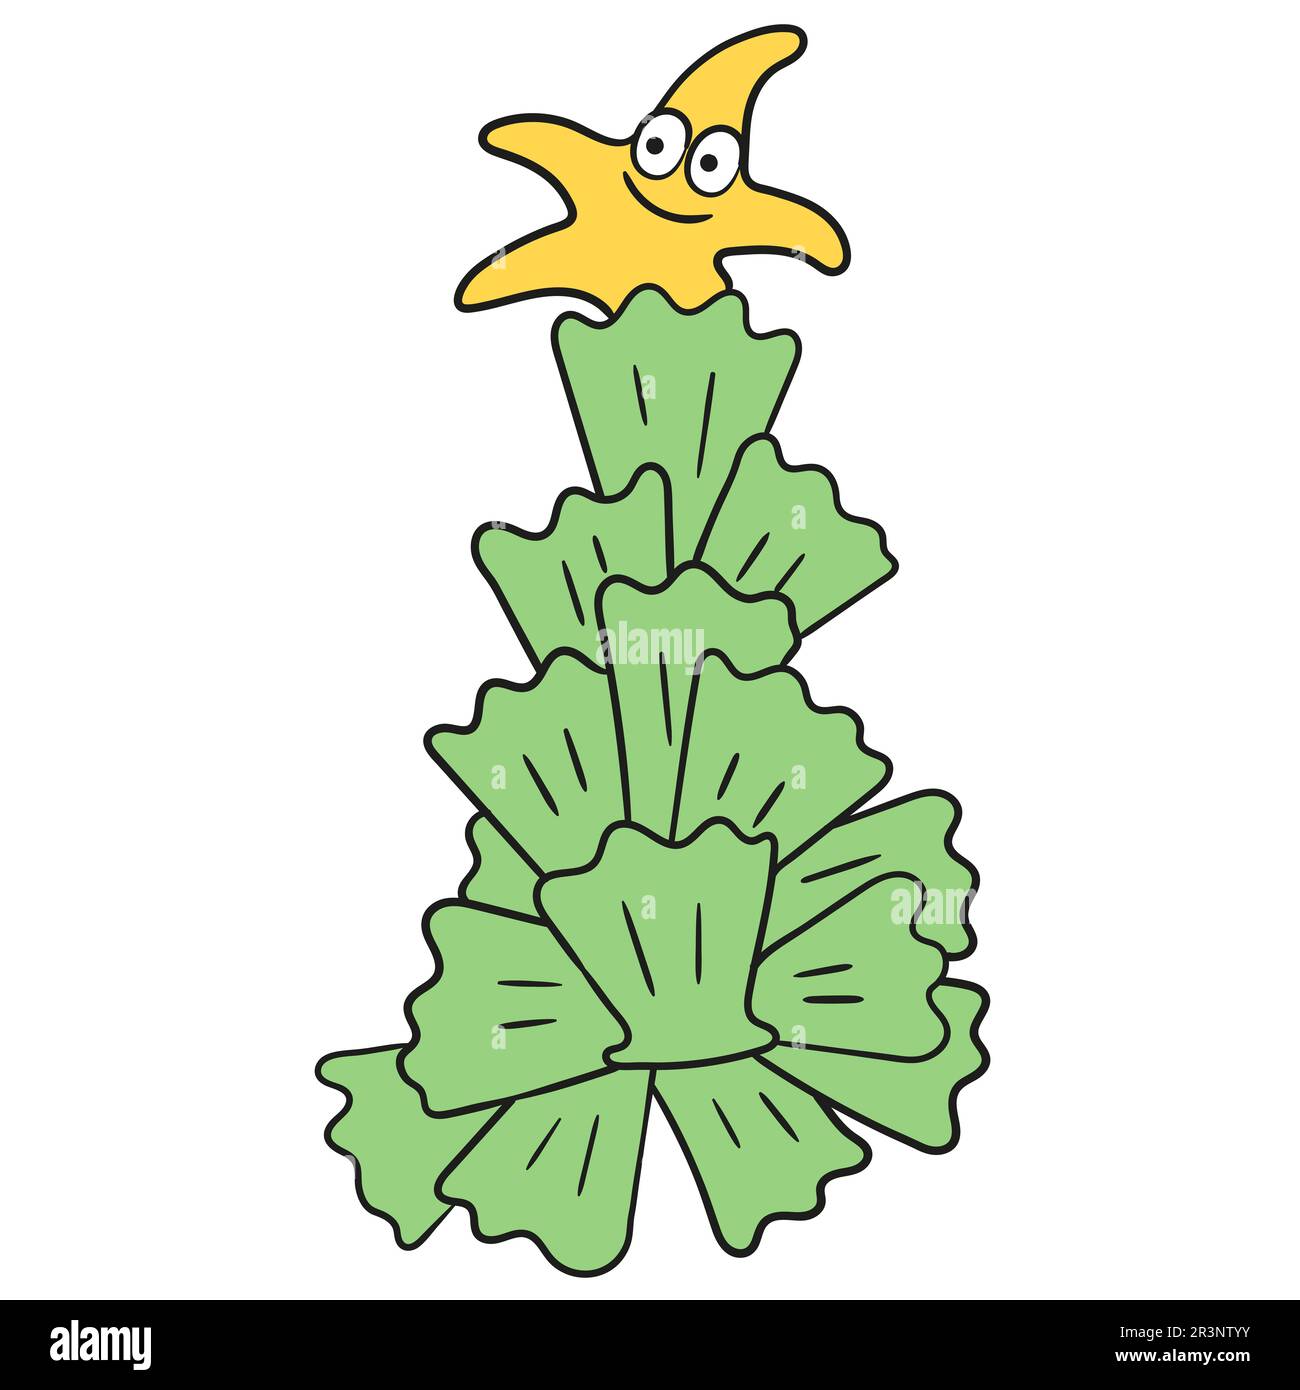 An offering of the sea christmas tree. doodle icon image Stock Photo